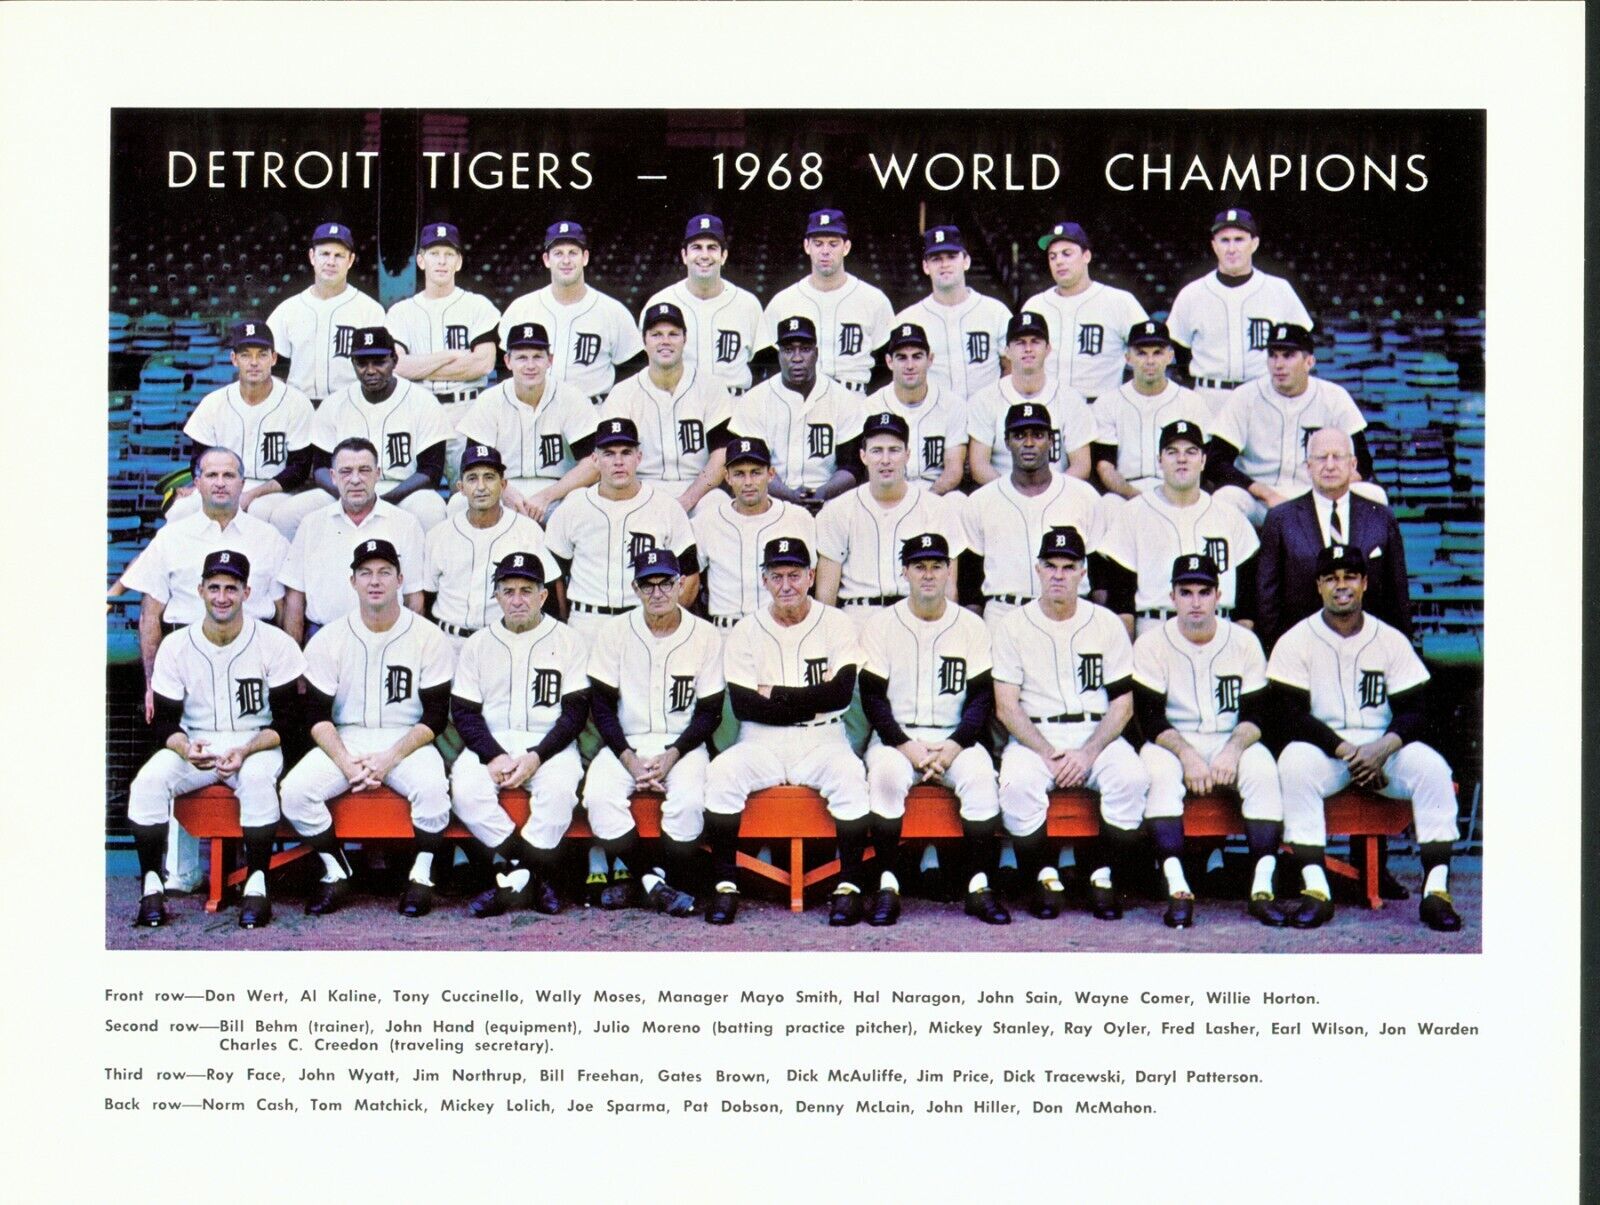 8x10 1968 Detroit Tigers Baseball Team GLOSSY PHOTO photograph picture print